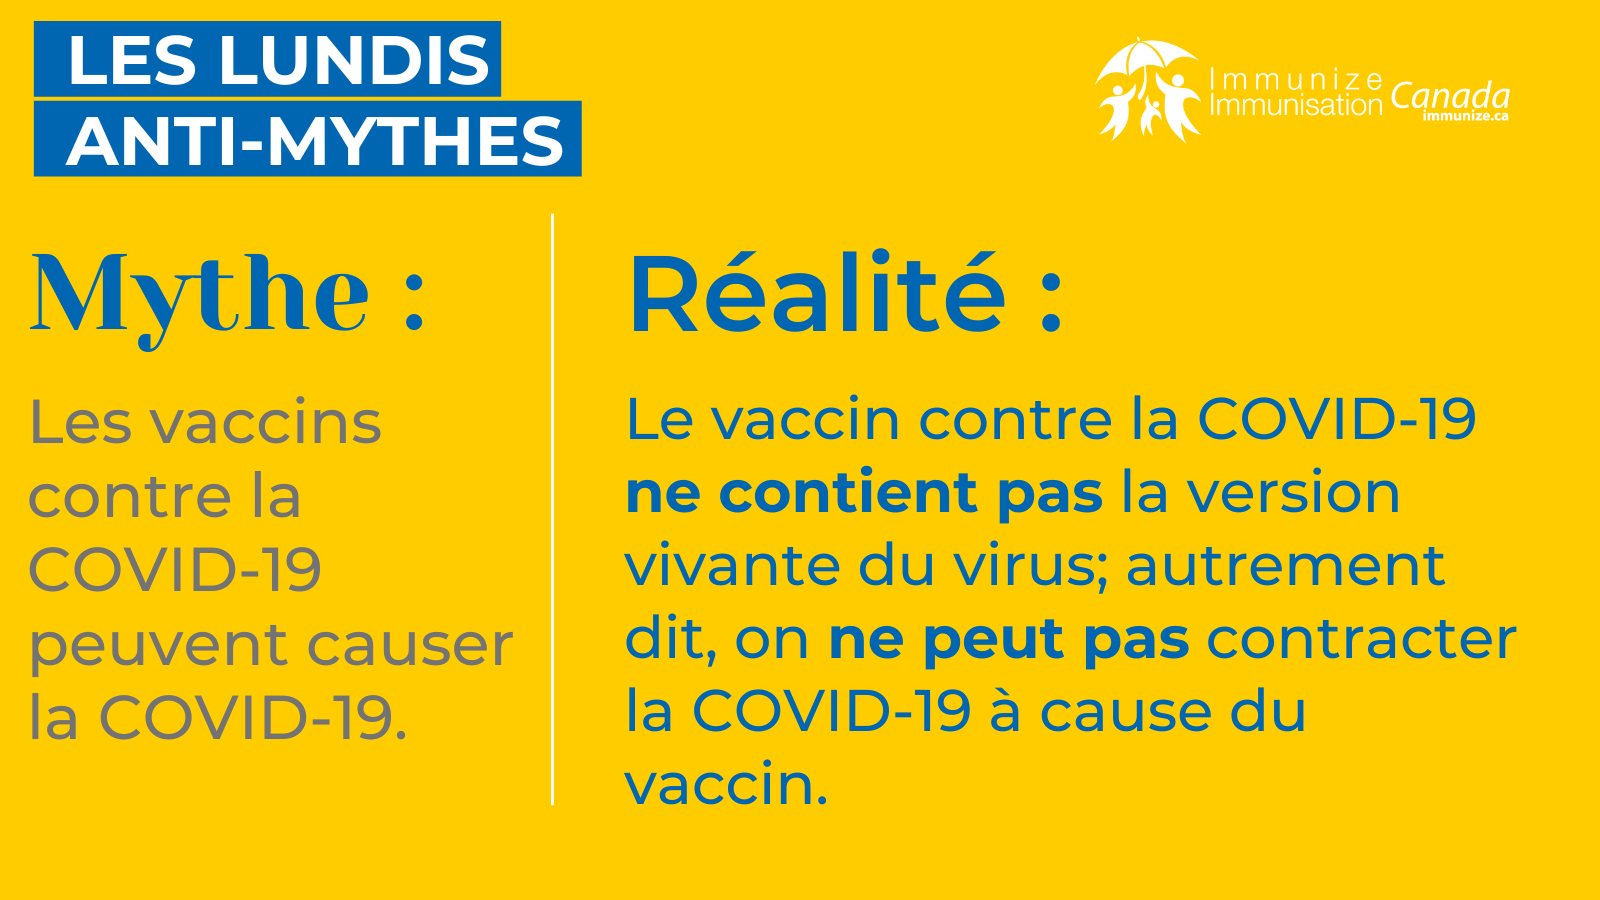 Les lundis anti-mythes - COVID-19 - image 4 pour Twitter/X